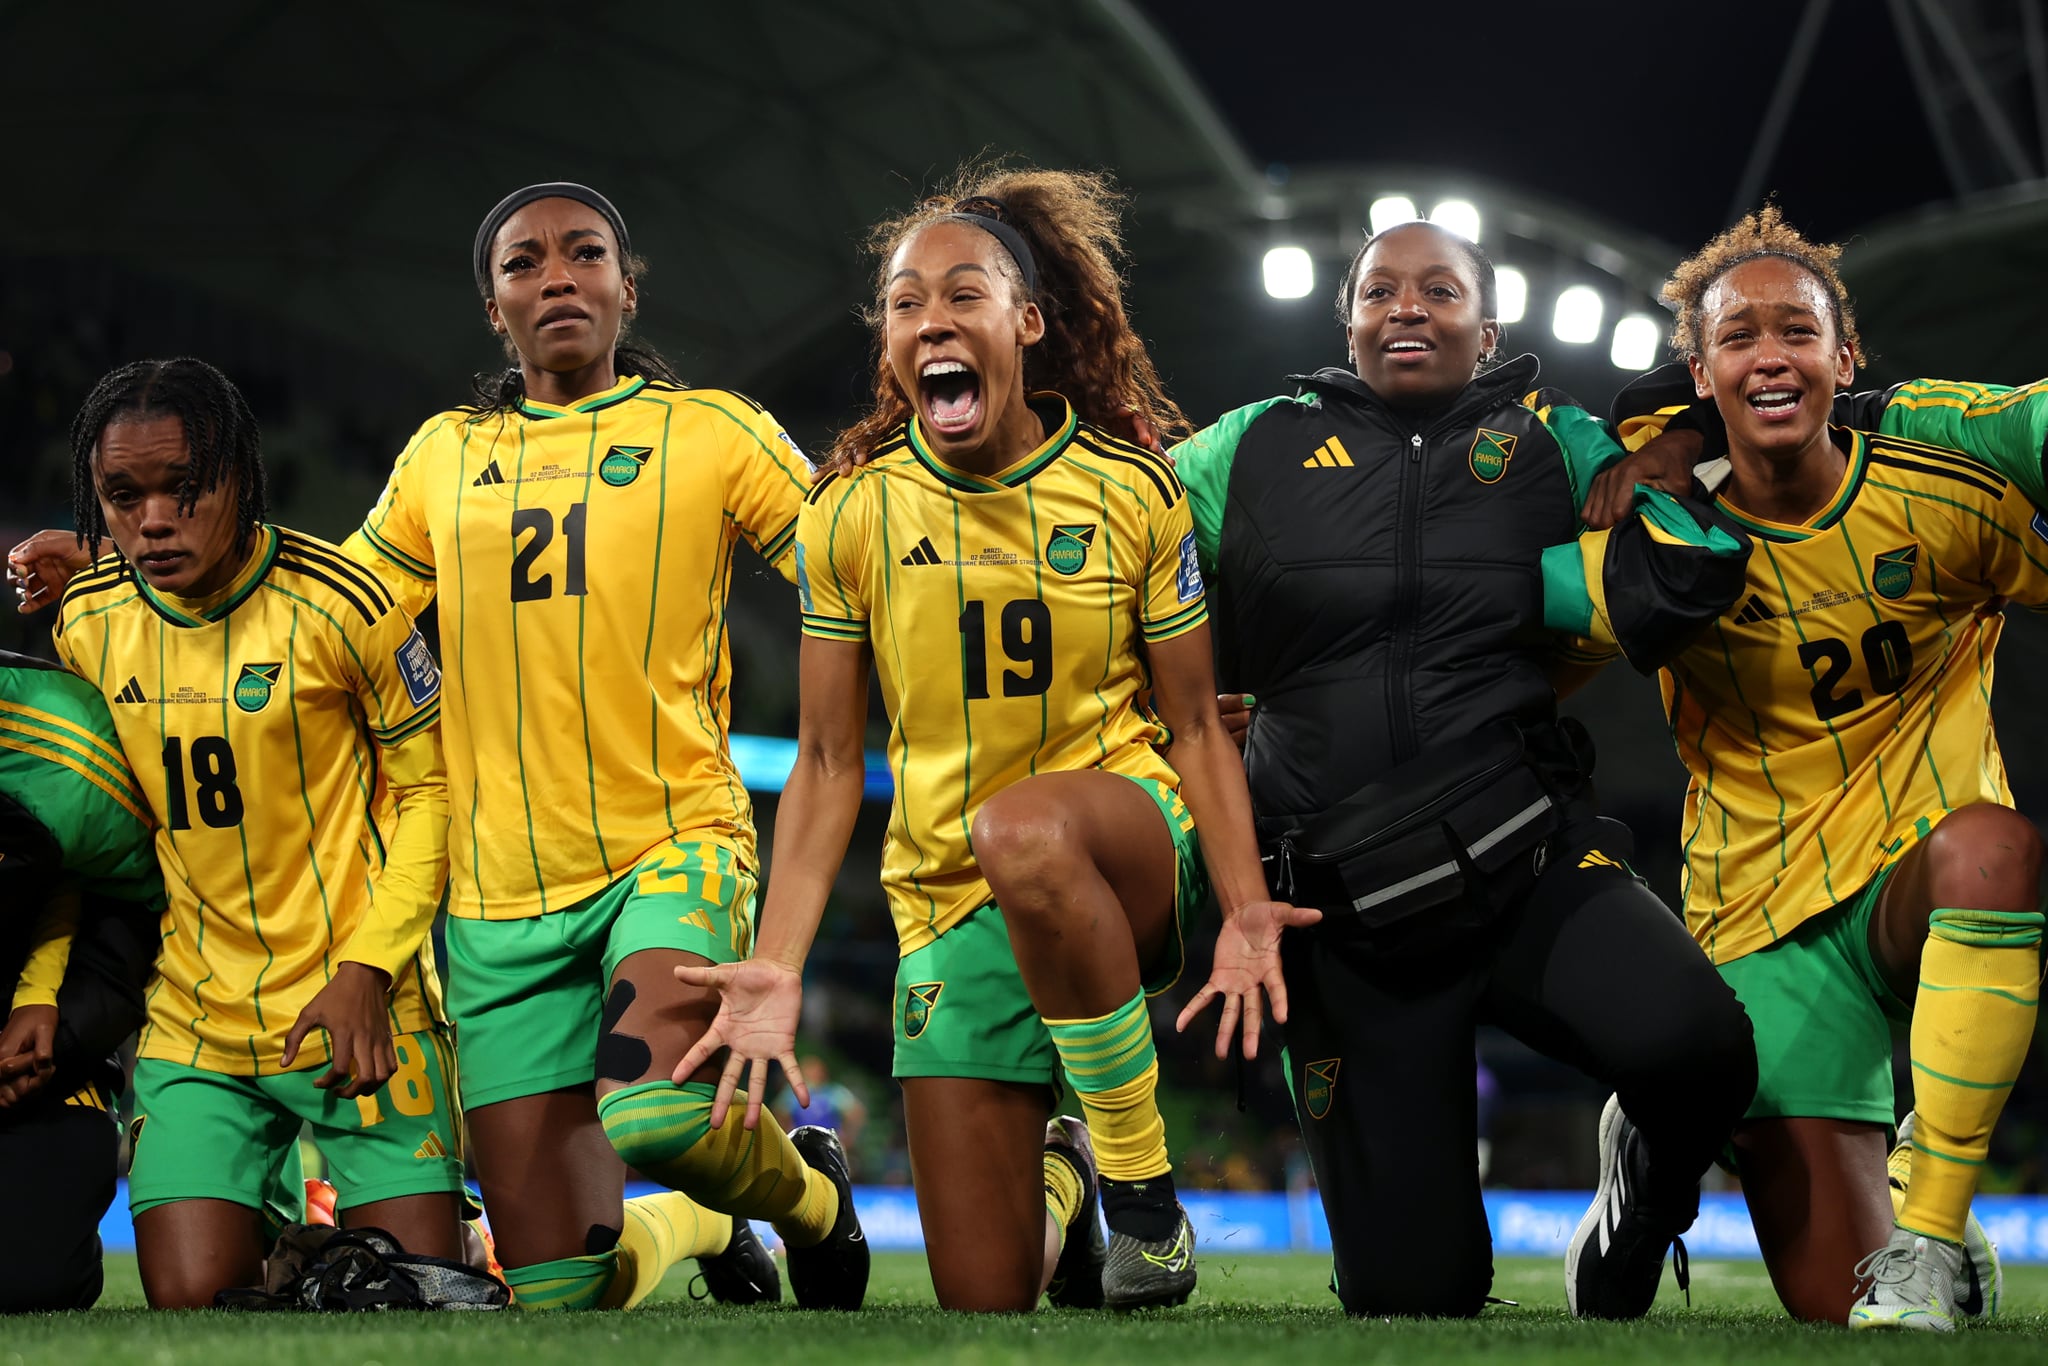 MELBOURNE, AUSTRALIA - AUGUST 02: Tiernny Wiltshire of Jamaica celebrates victory during the FIFA Women's World Cup Australia & New Zealand 2023 Group F match between Jamaica and Brazil at Melbourne Rectangular Stadium on August 02, 2023 in Melbourne / Naarm, Australia. (Photo by Alex Pantling - FIFA/FIFA via Getty Images)